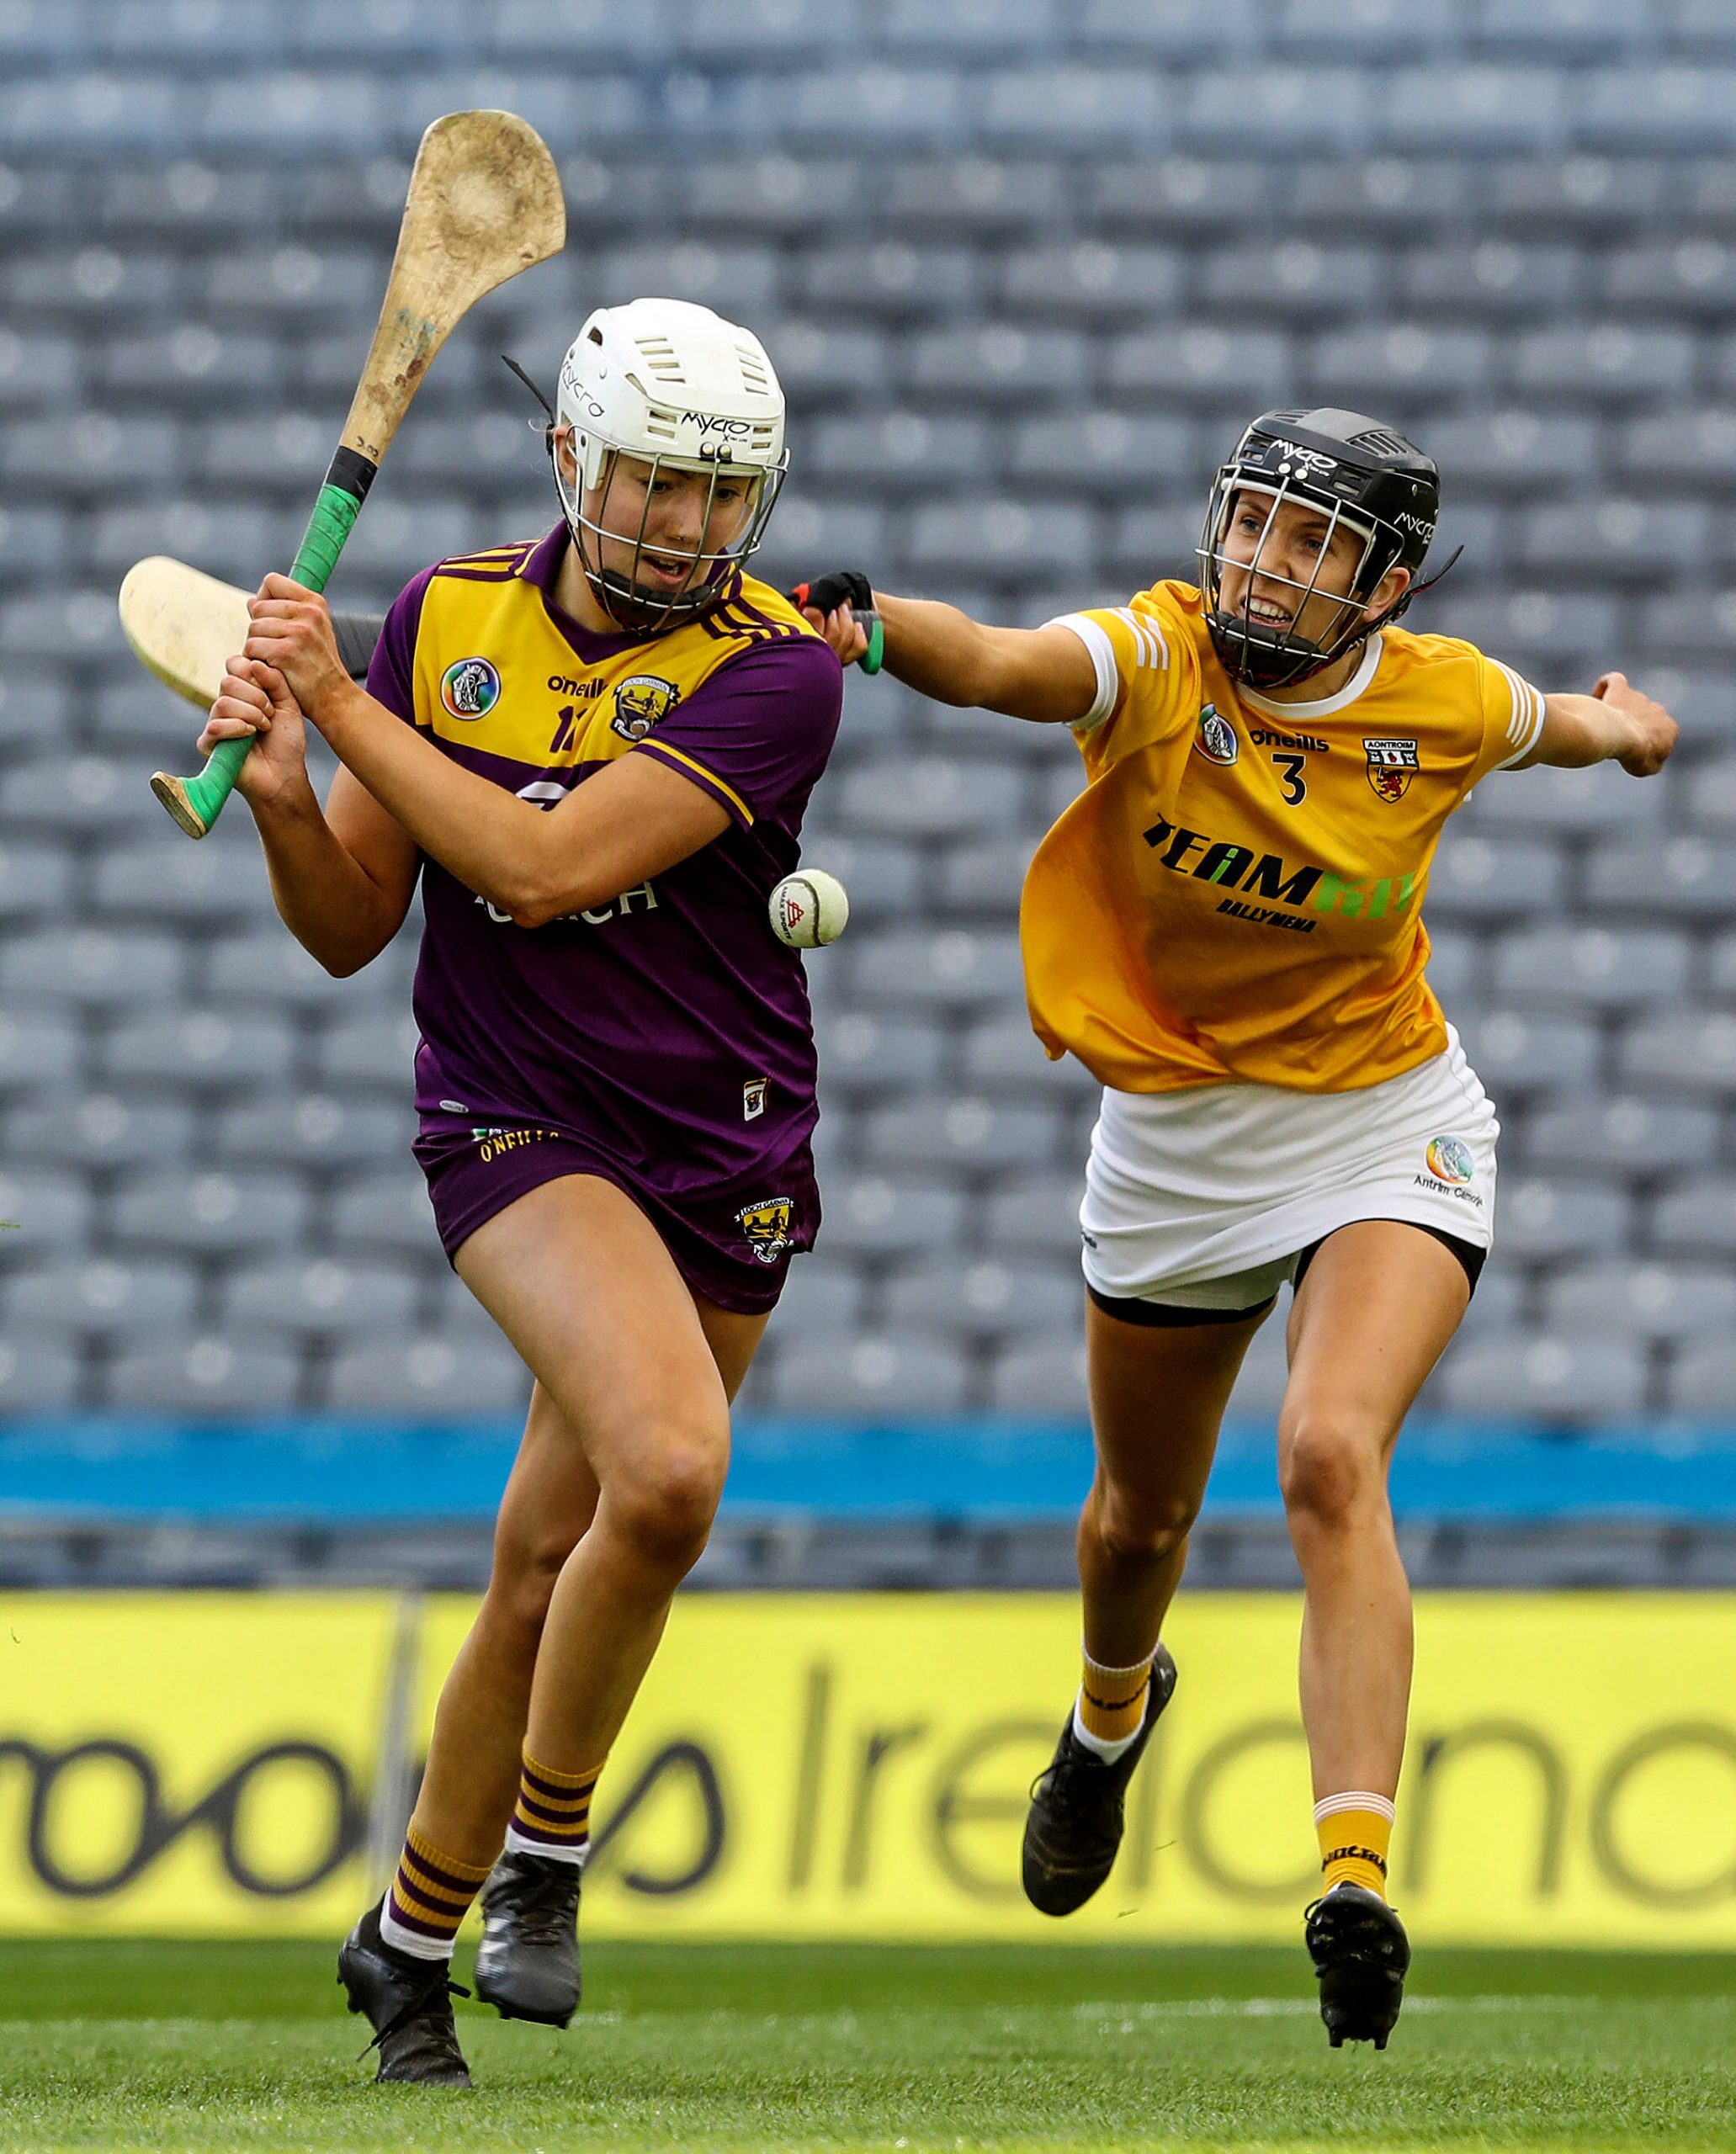 REPORT: Fast start carries Wexford to league glory